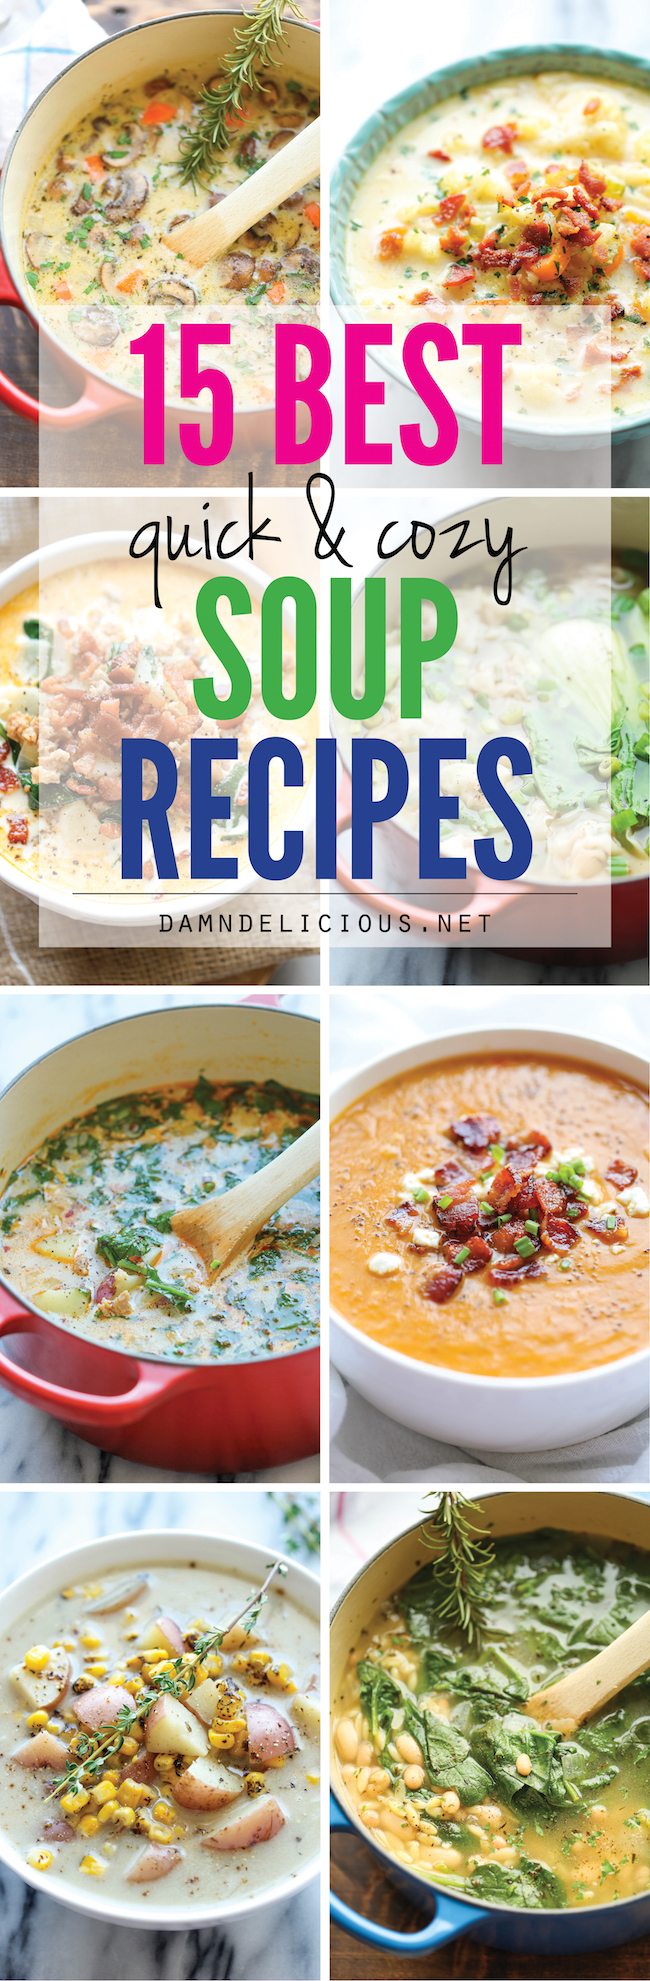 15 Best Quick and Cozy Soup Recipes - Easy peasy homemade soups to keep you warm and cozy all year long!